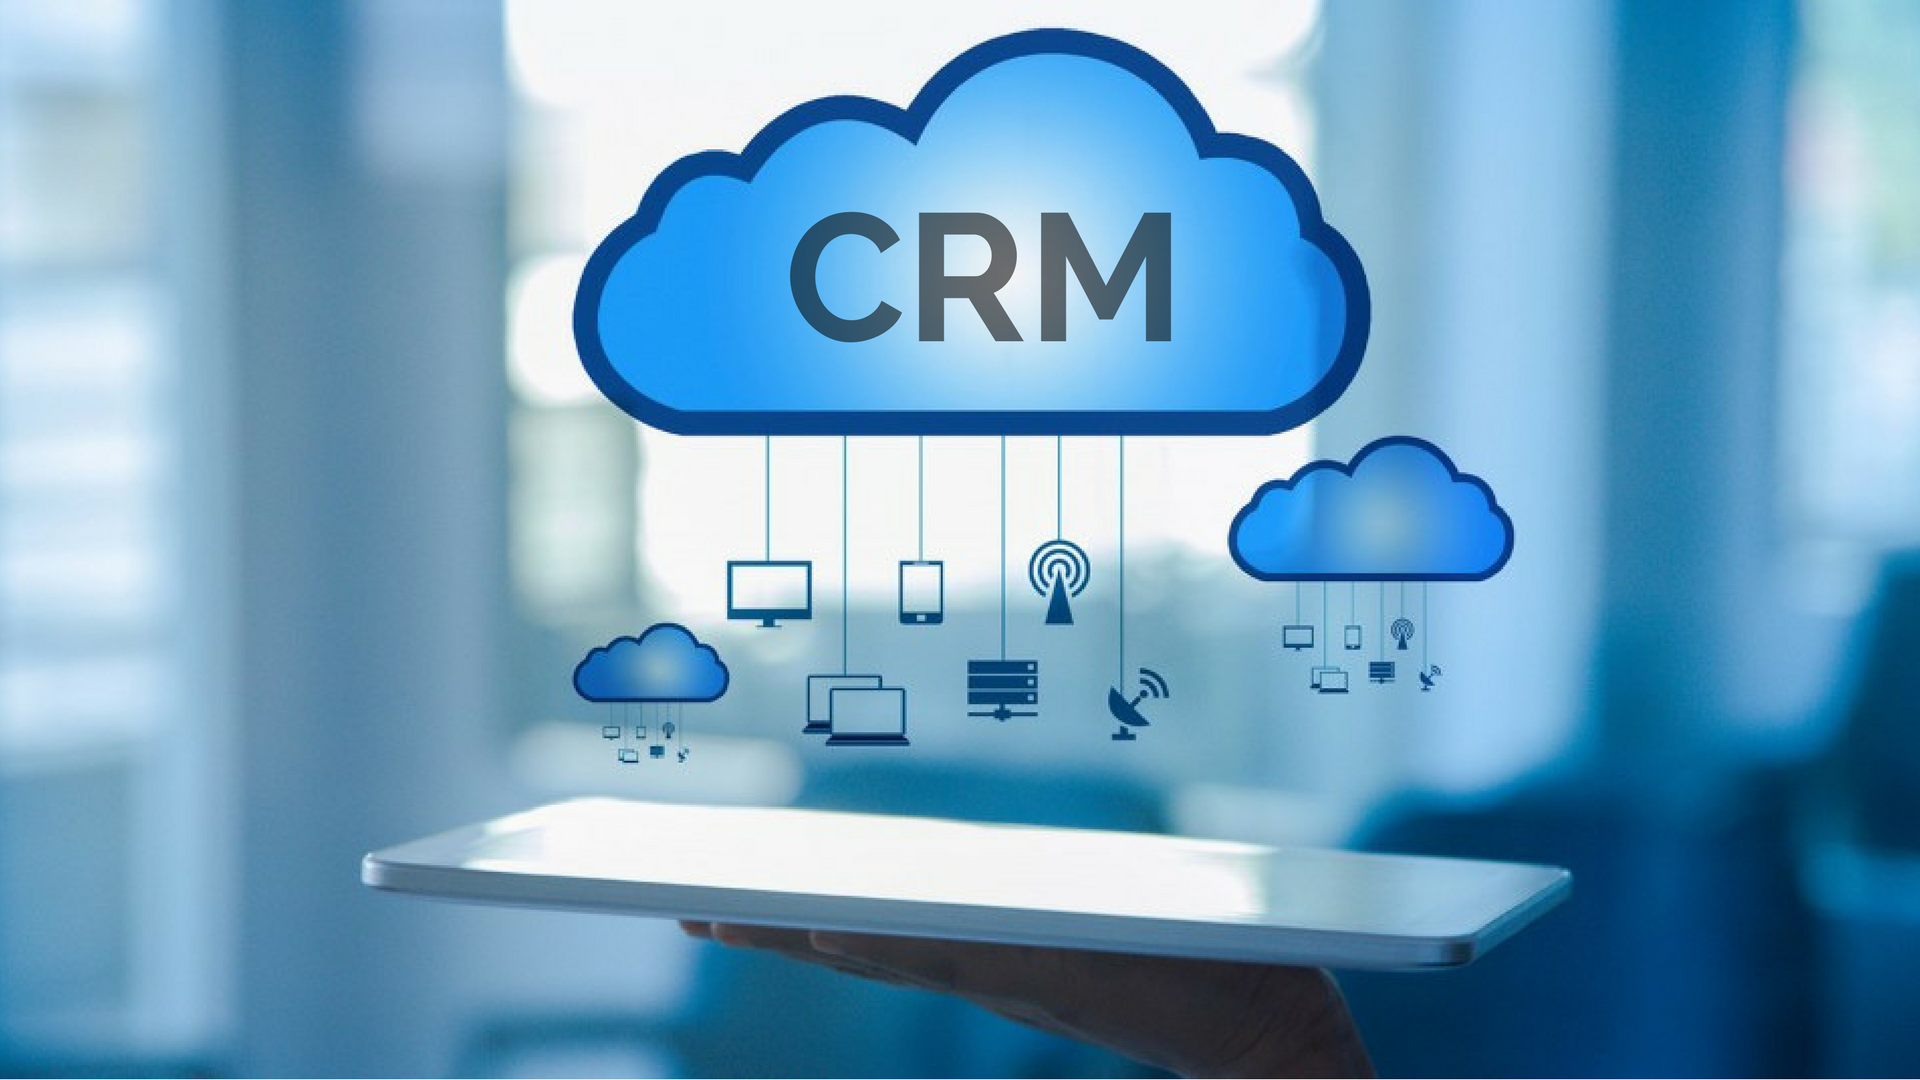 A complete guide to understand the CRM system